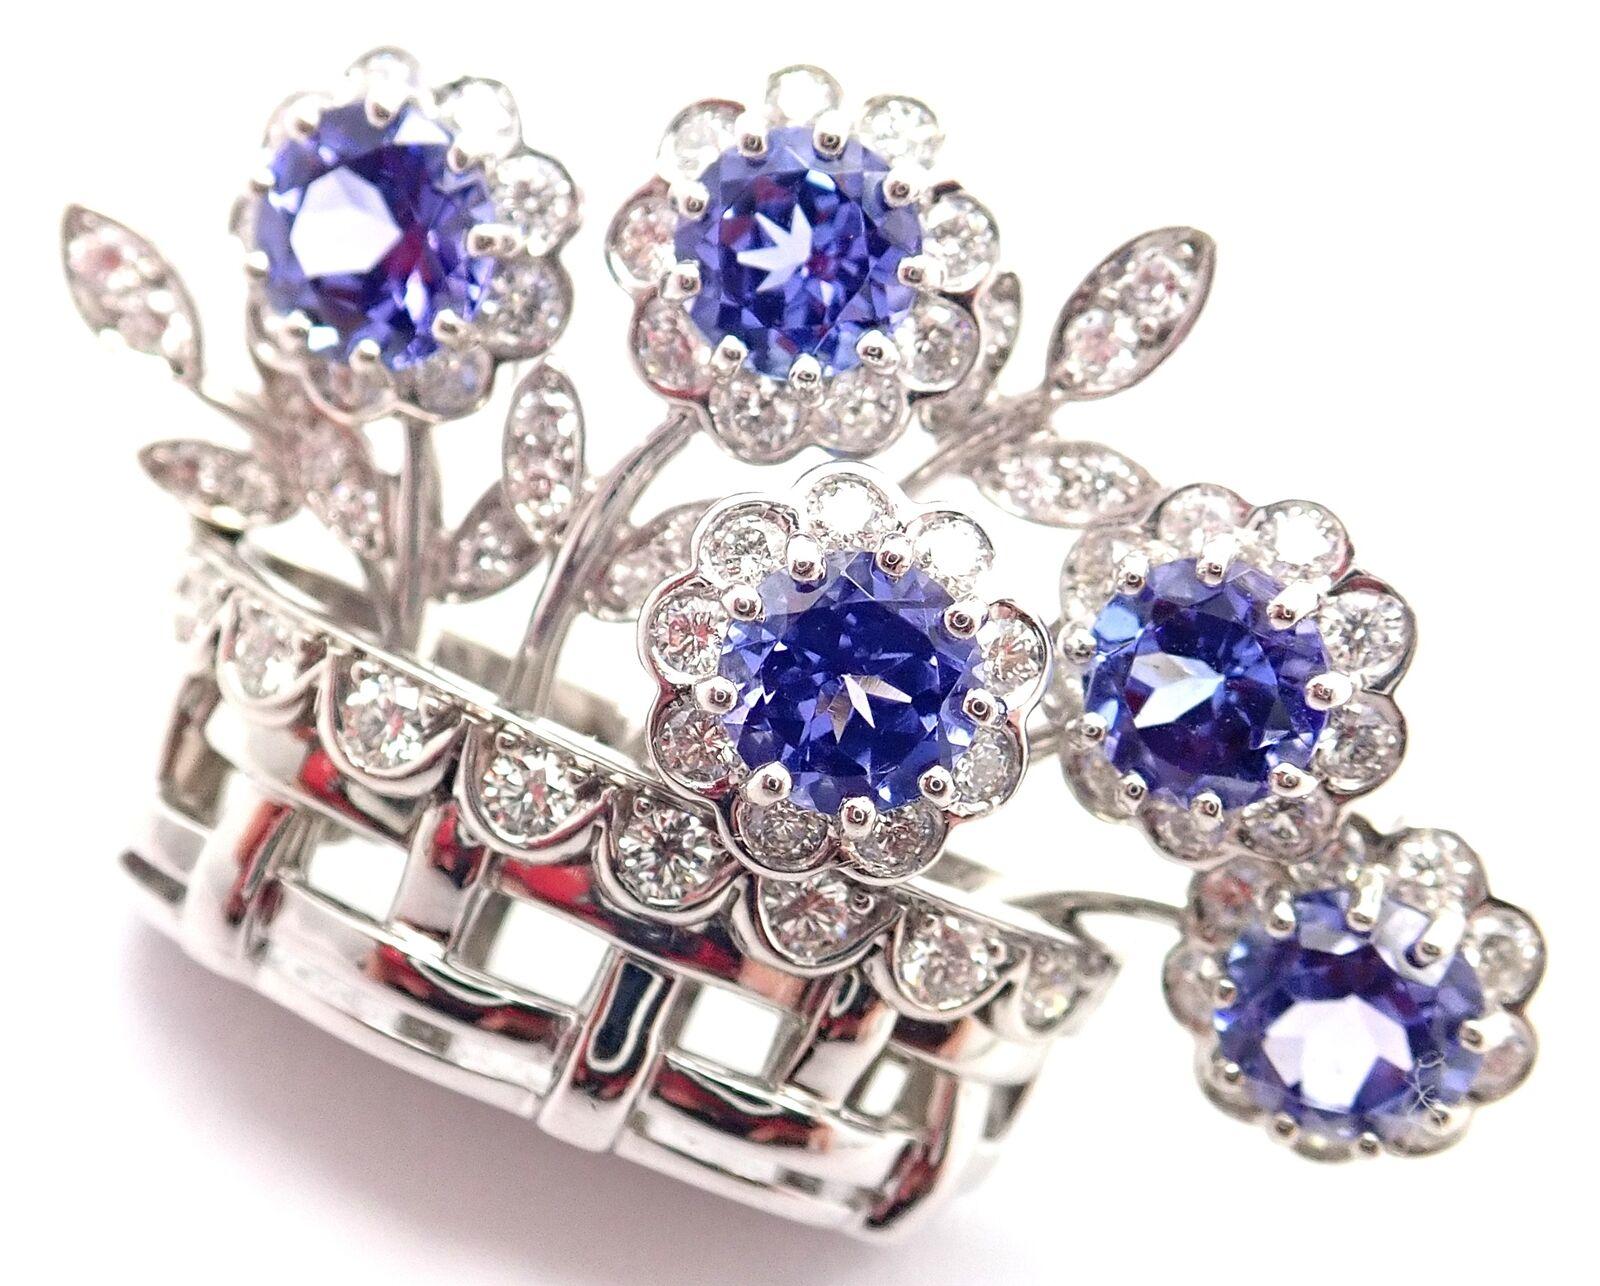 Vintage Platinum Diamond Sapphire Flower Basket Pin Brooch by Tiffany & Co.
With 75 round brilliant cut diamonds VS1 clarity, G color total weight approx. 1.50ct
5 round sapphires 6mm each
Details:
Measurements: 24mm x 38mm
Weight: 17.9